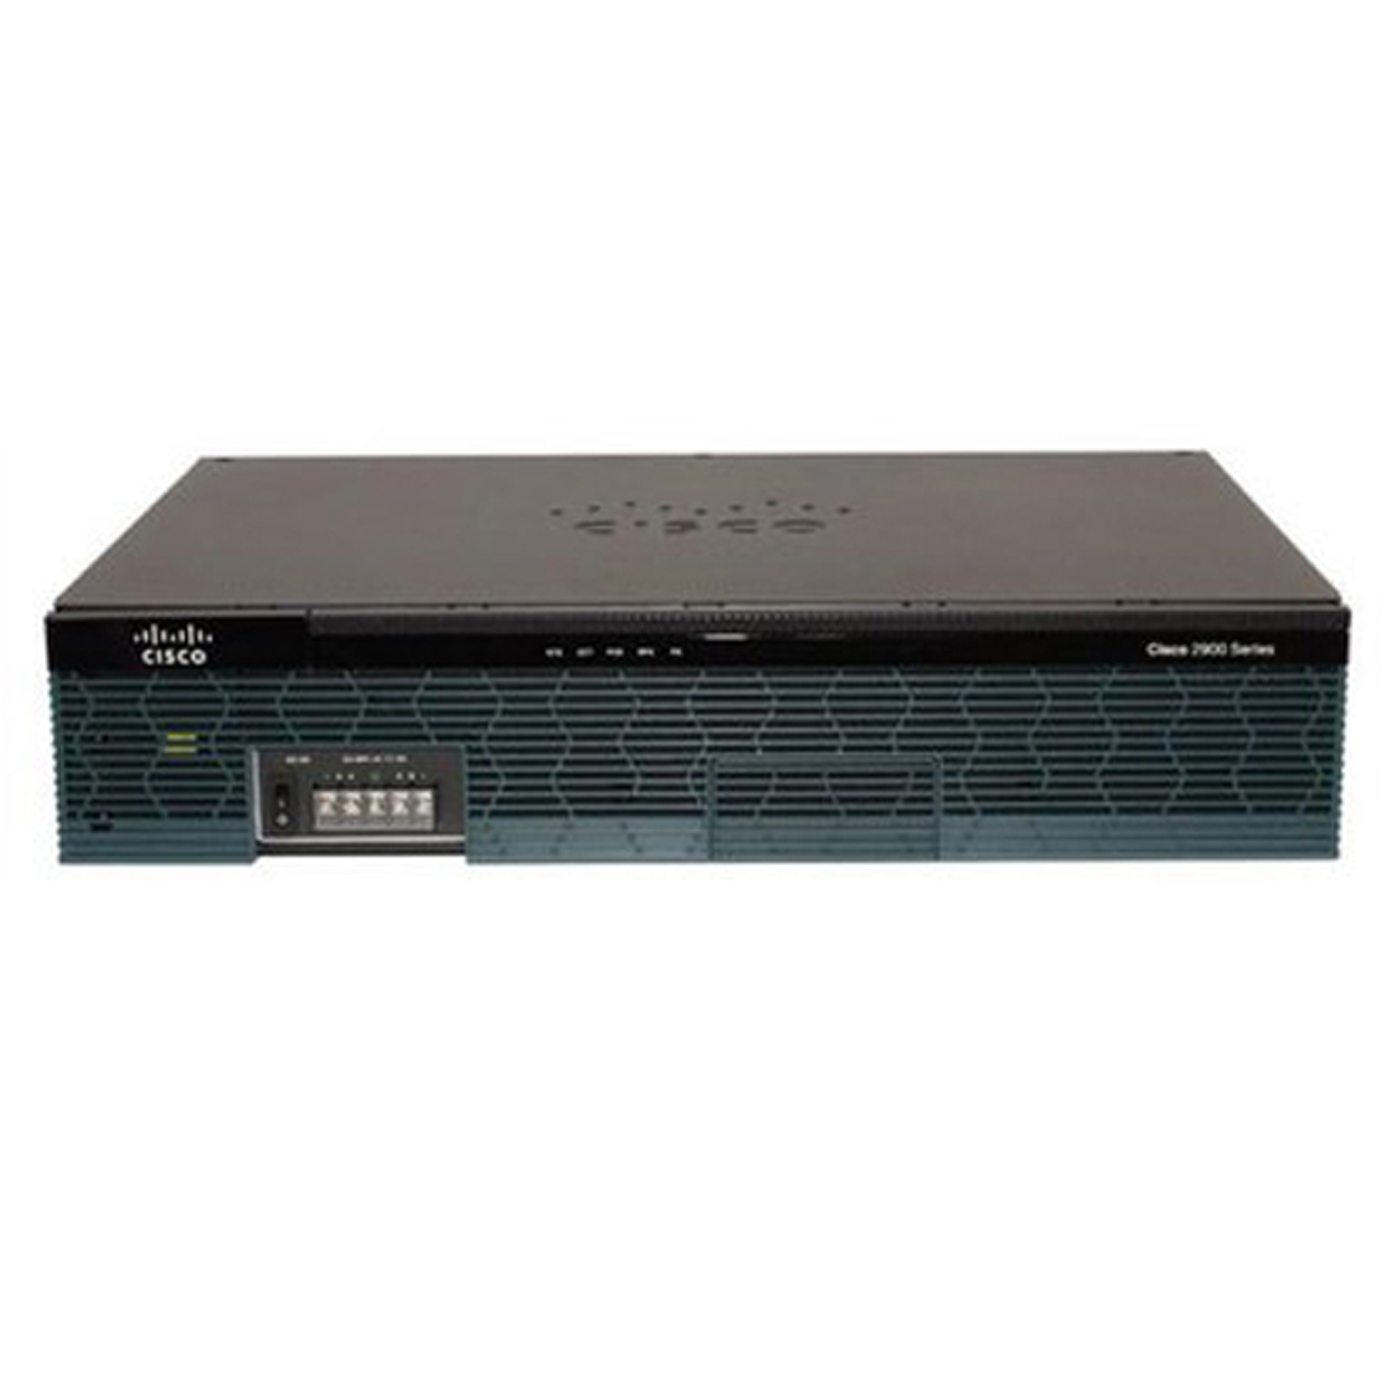 refurbished and used-Cisco-2900-Series-Integrated-Service-Router-Mumbai